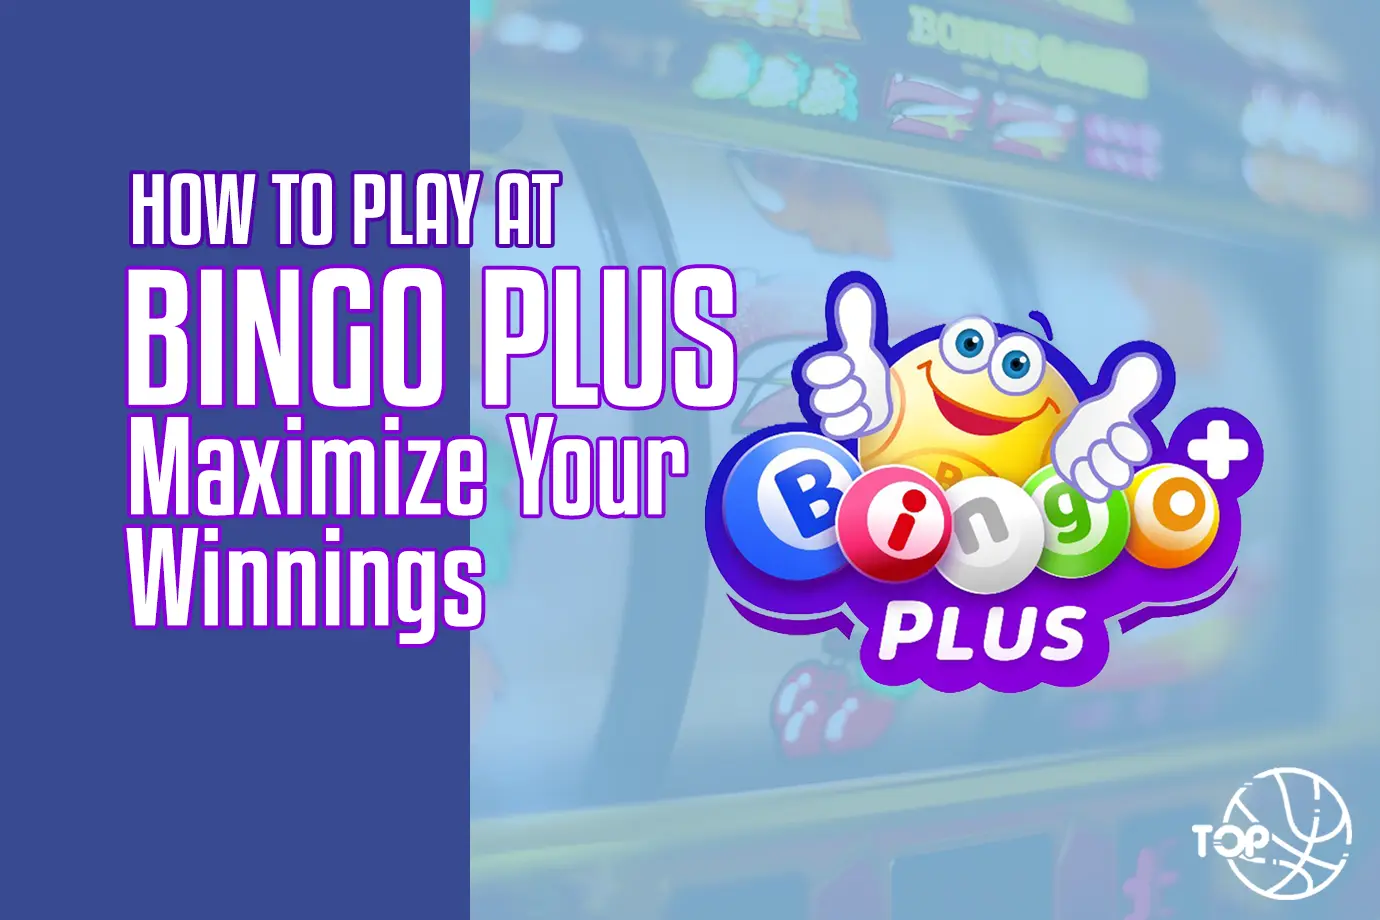 How to Play at Bingo Plus and Maximize Your Winnings